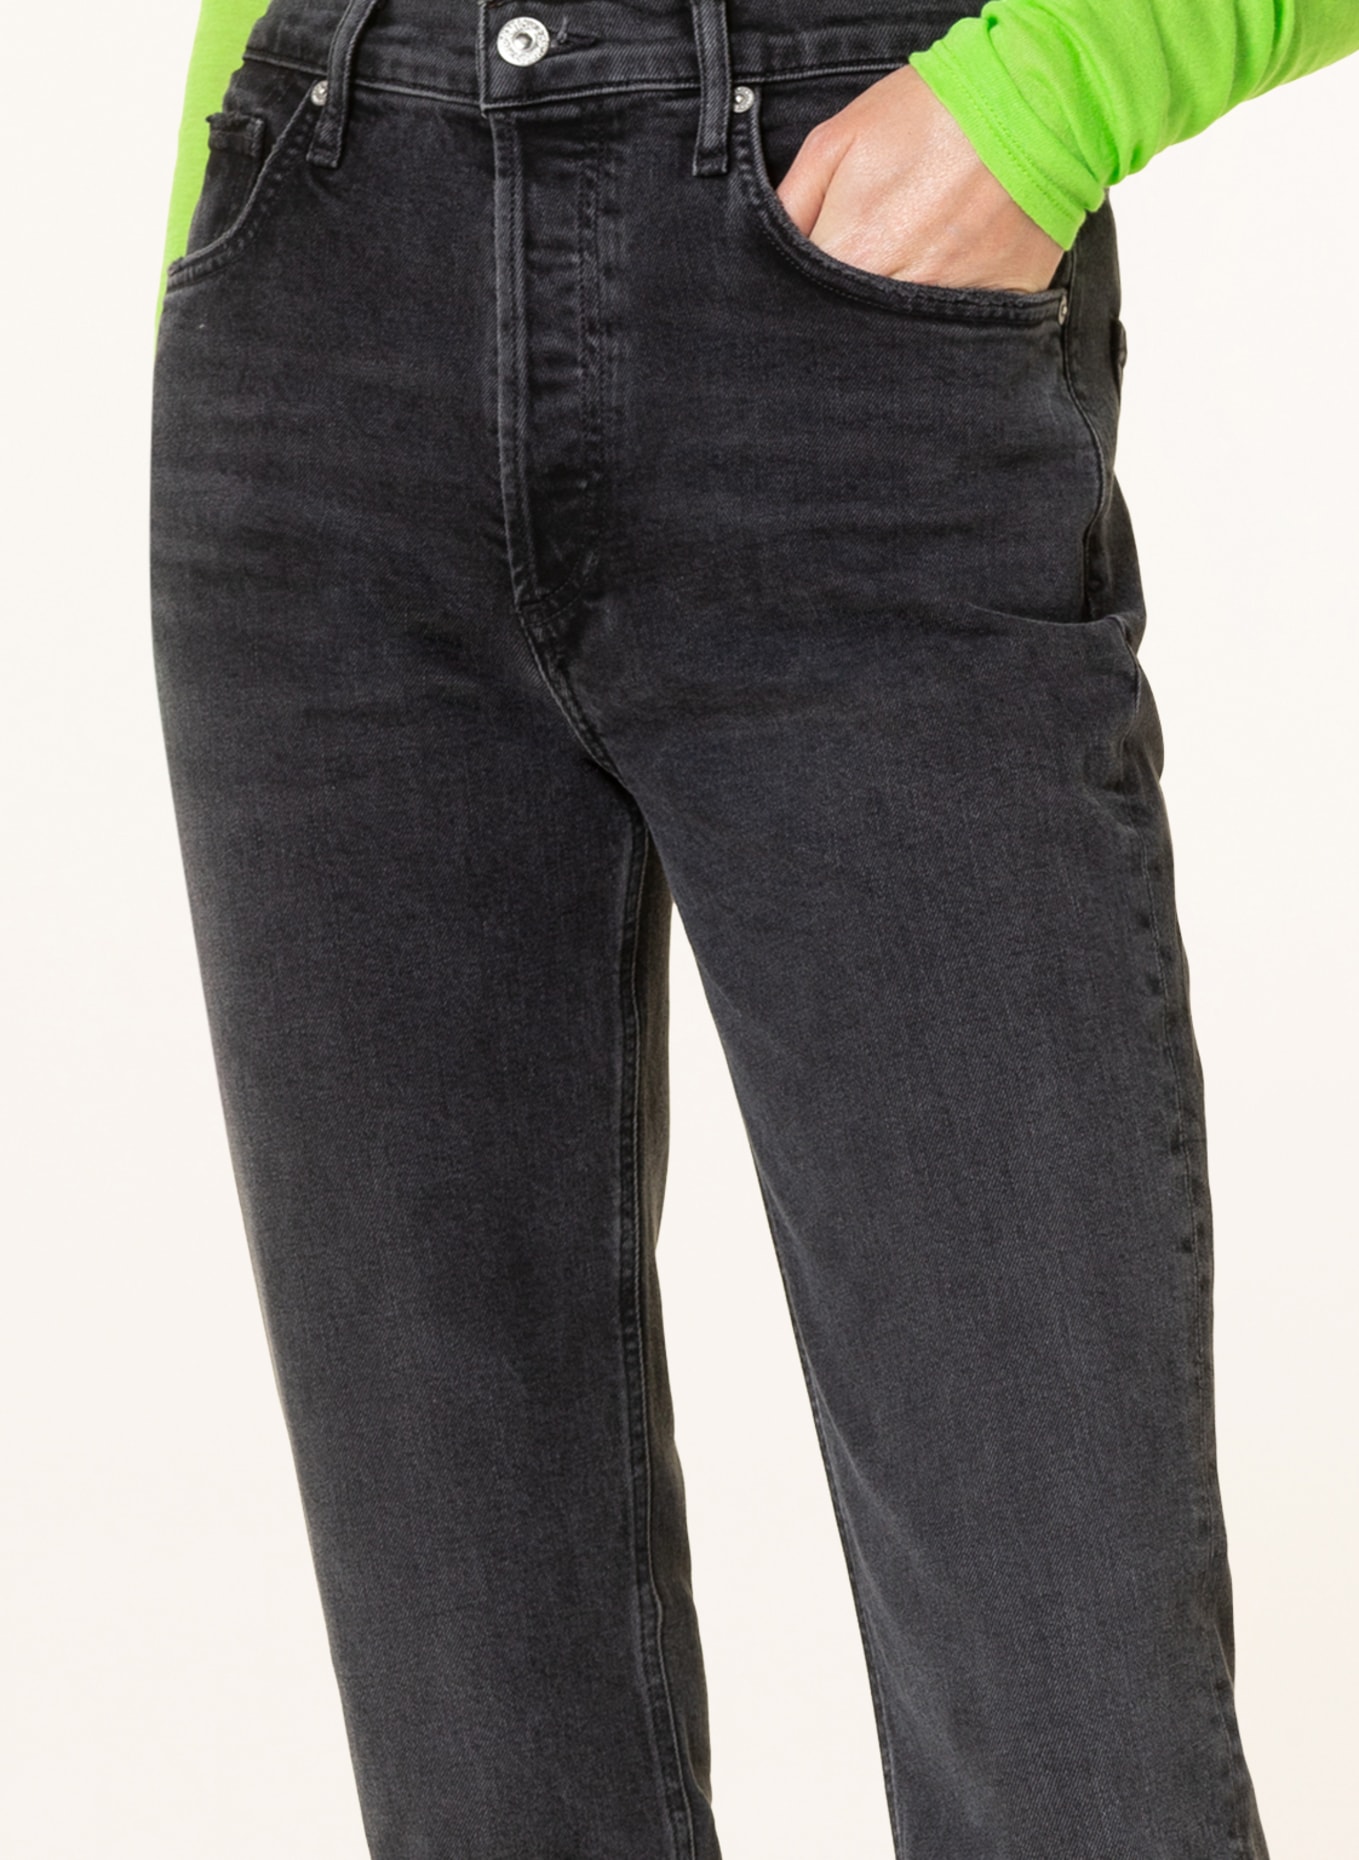 CITIZENS of HUMANITY Bootcut Jeans LIBBY, Farbe: Lights Out washed black (Bild 5)